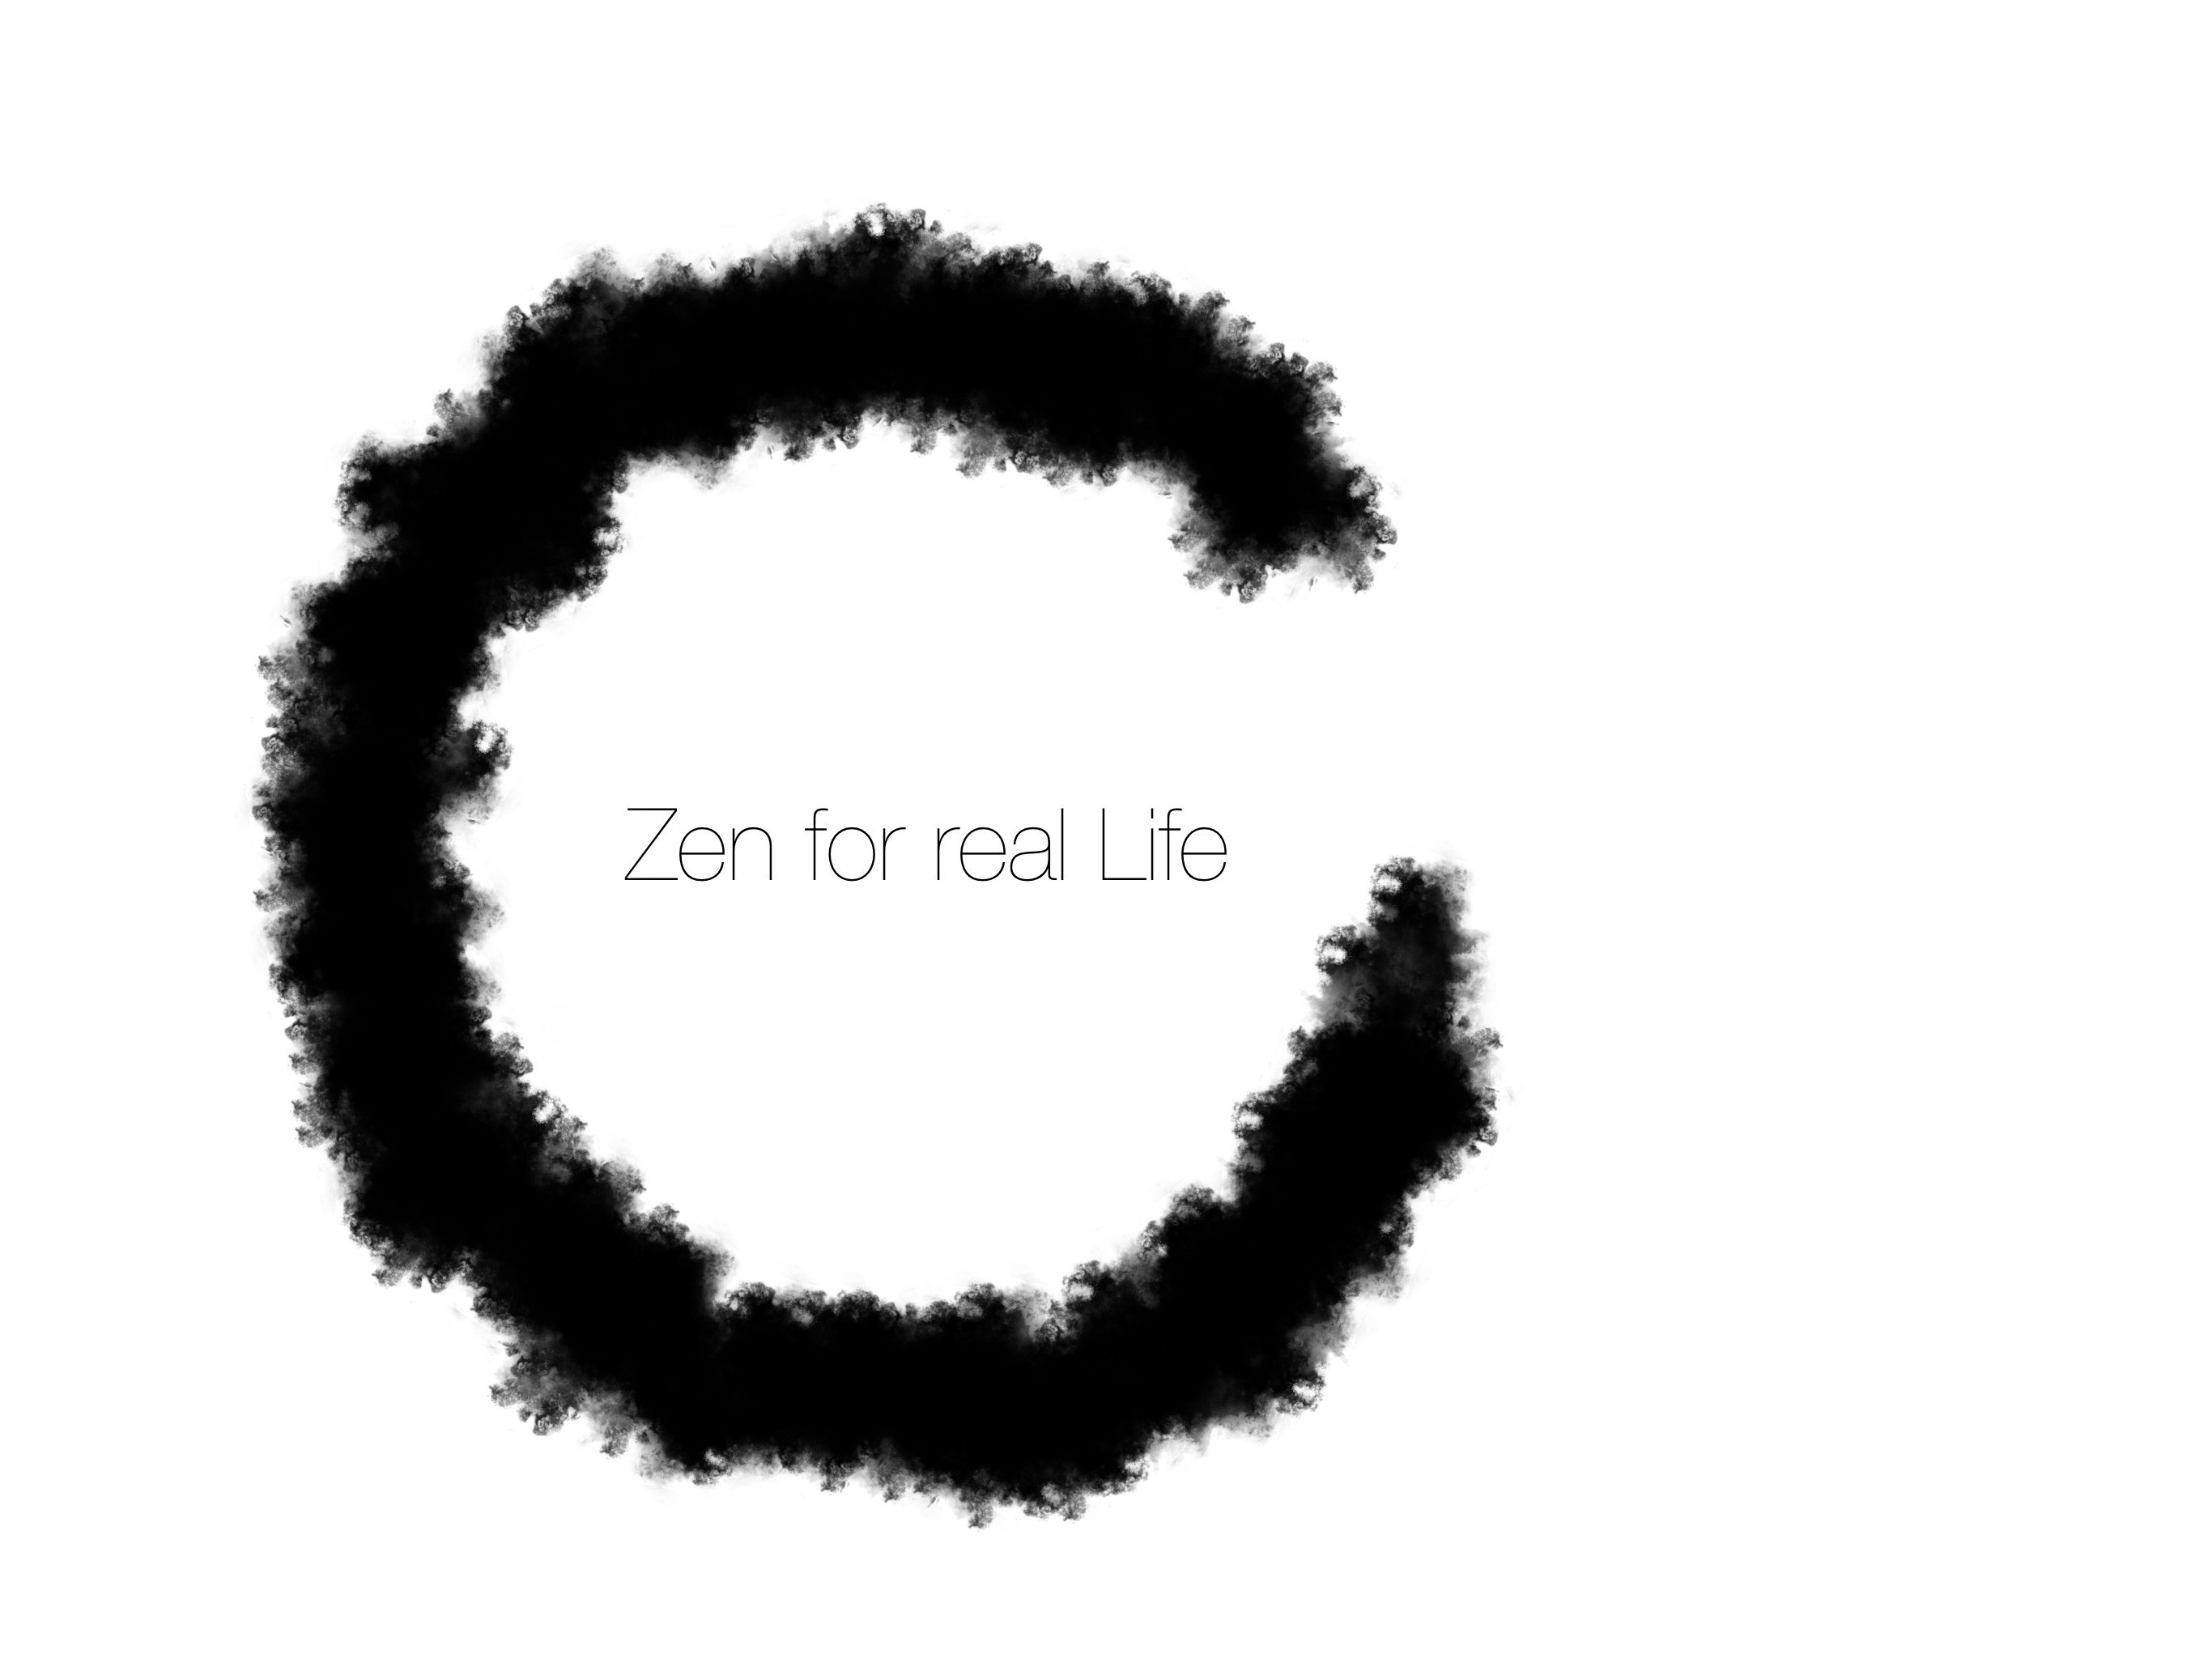 black enso painted with water colour, with the digitized text 'Zen for real Life' placed in its center